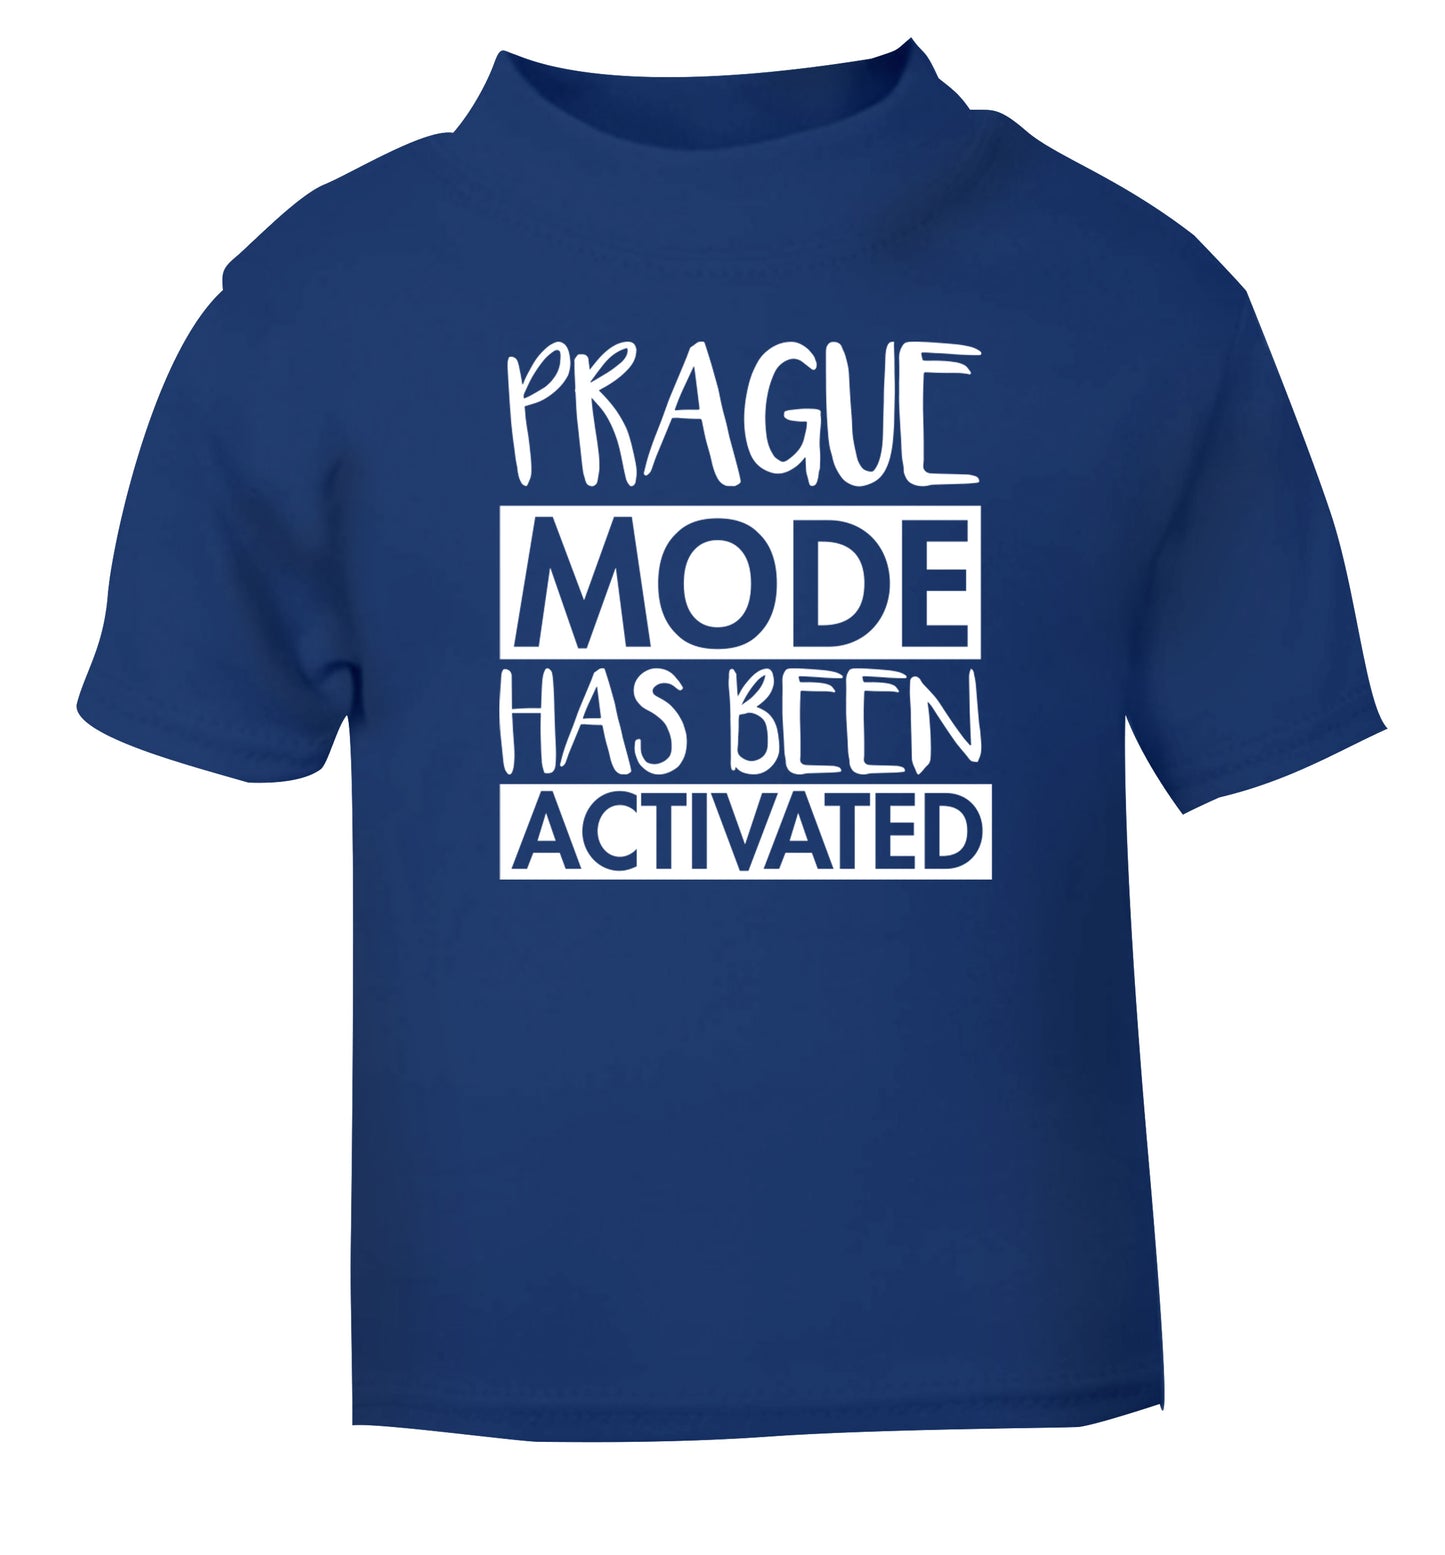 Prague mode has been activated blue Baby Toddler Tshirt 2 Years